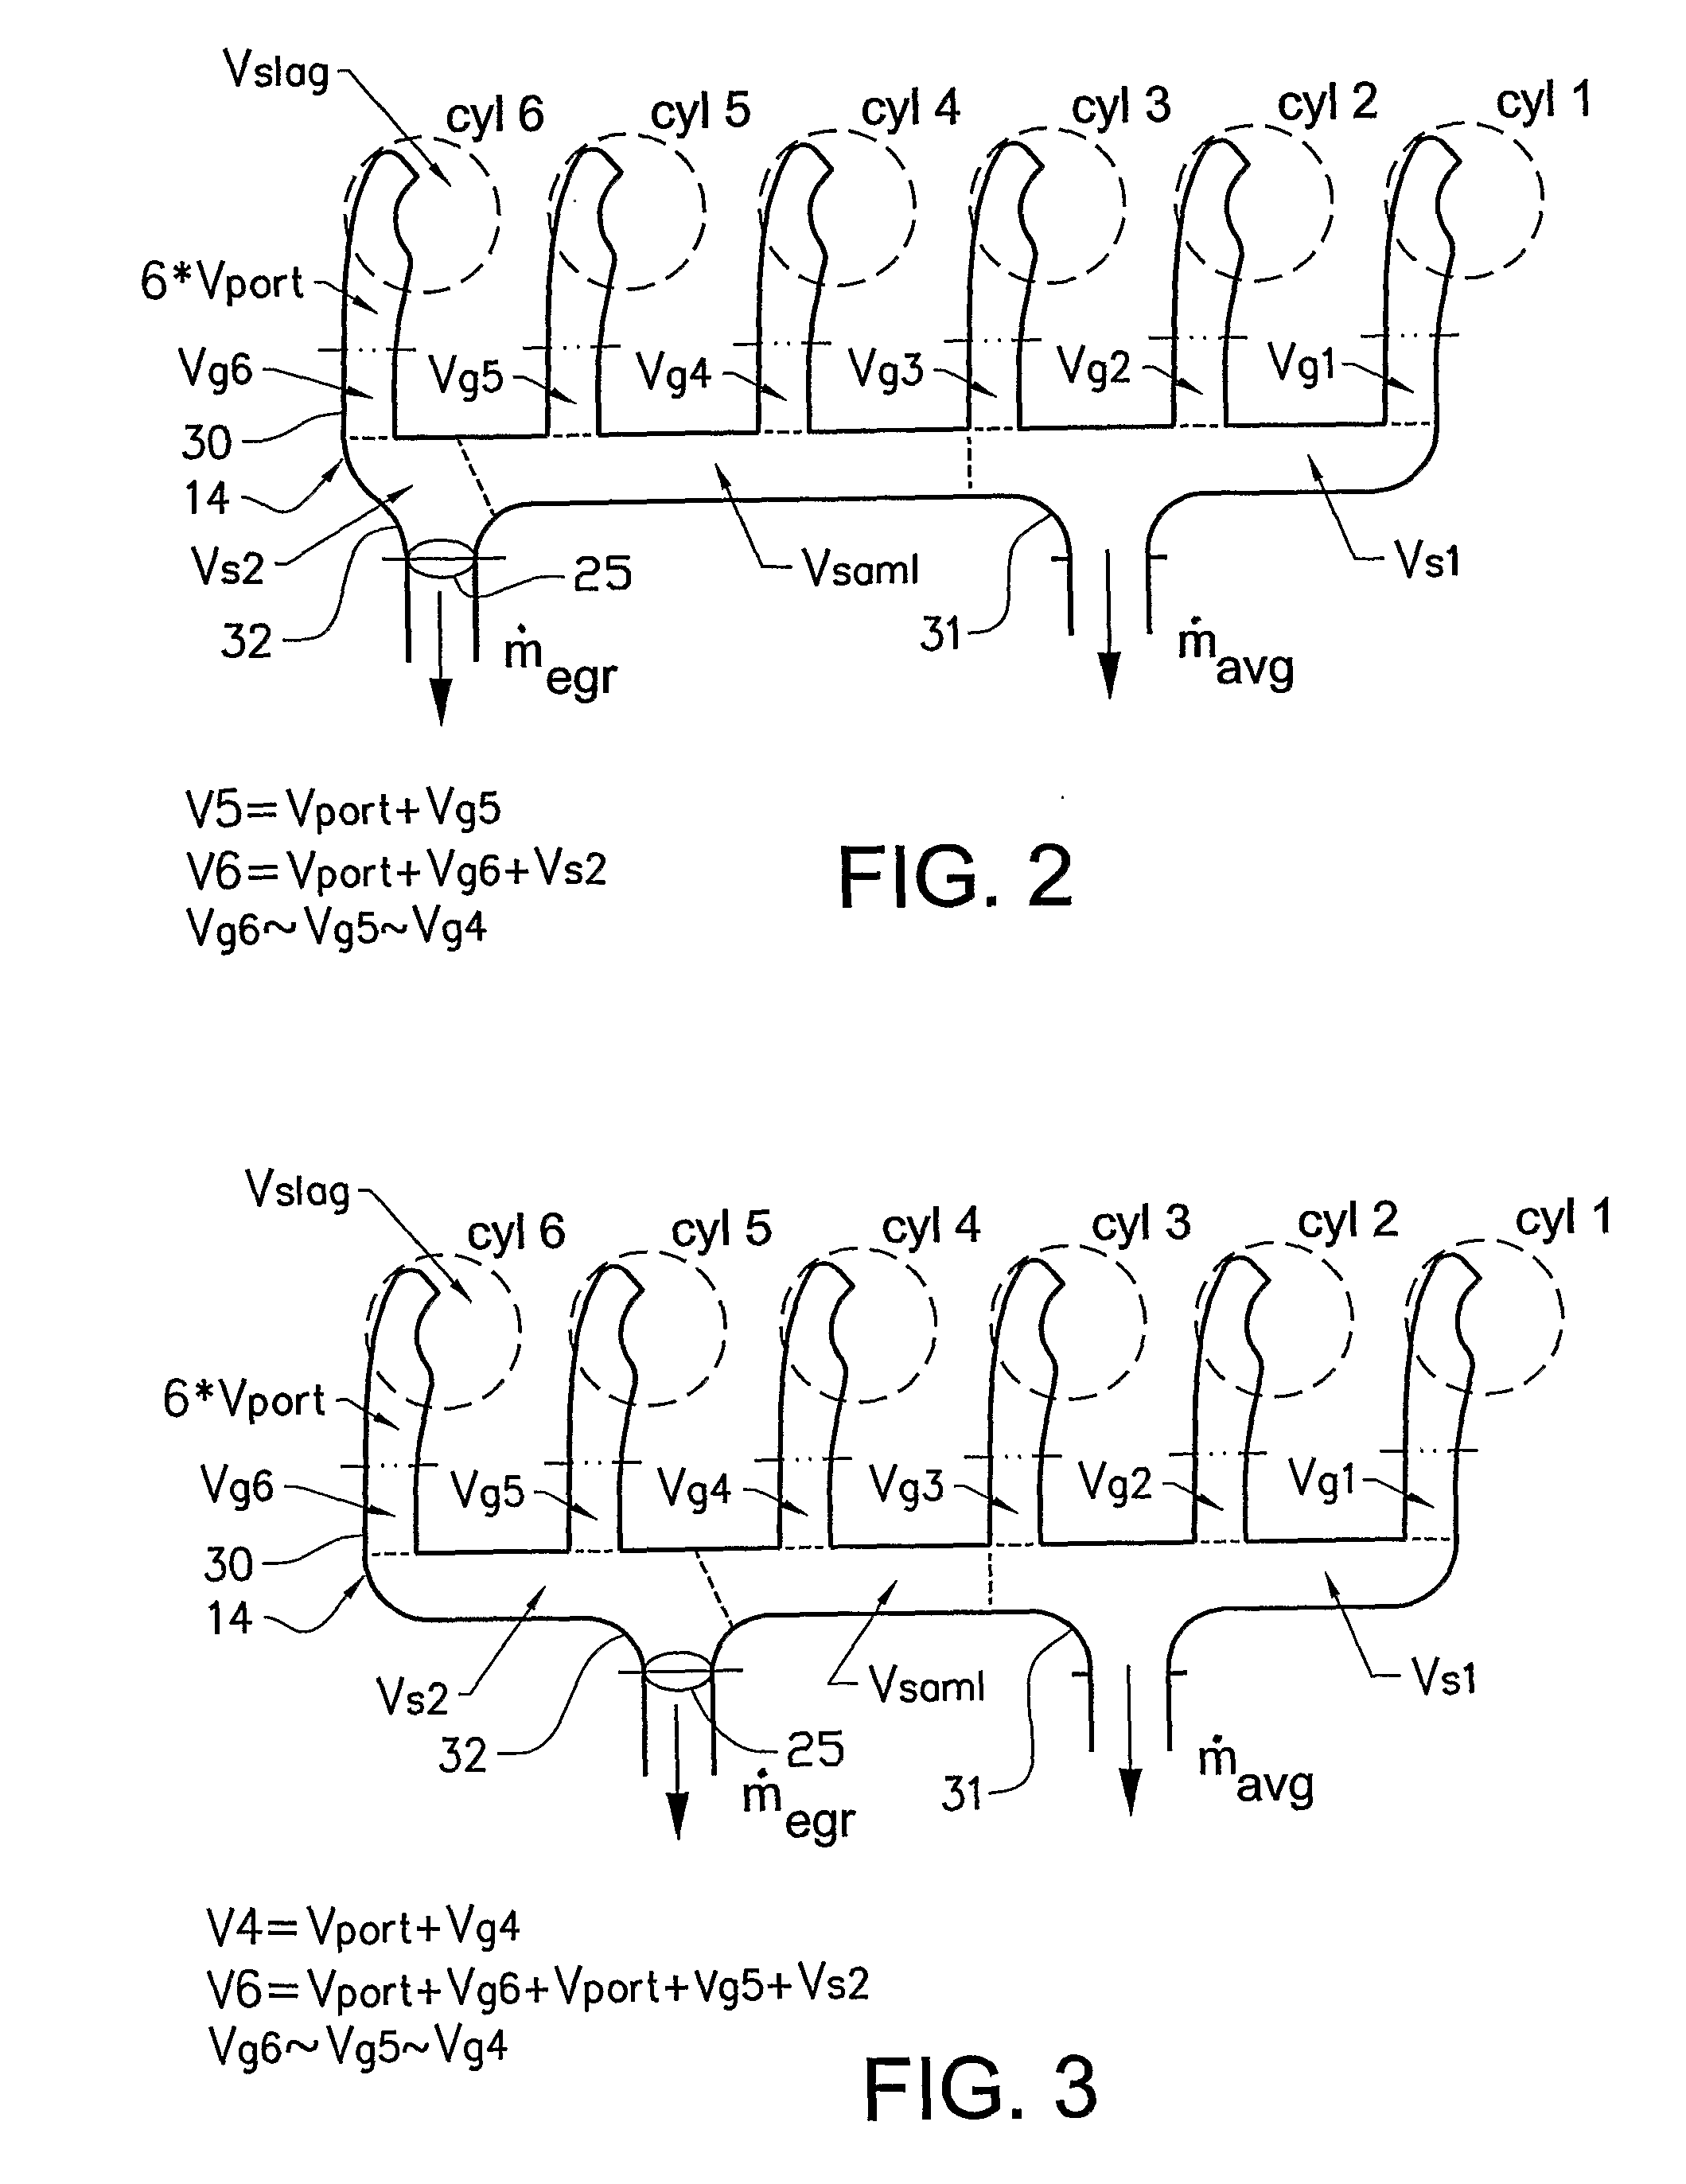 Arrangement For Controlling Exhaust Pressure Pulses At An Internal Combustion Engine